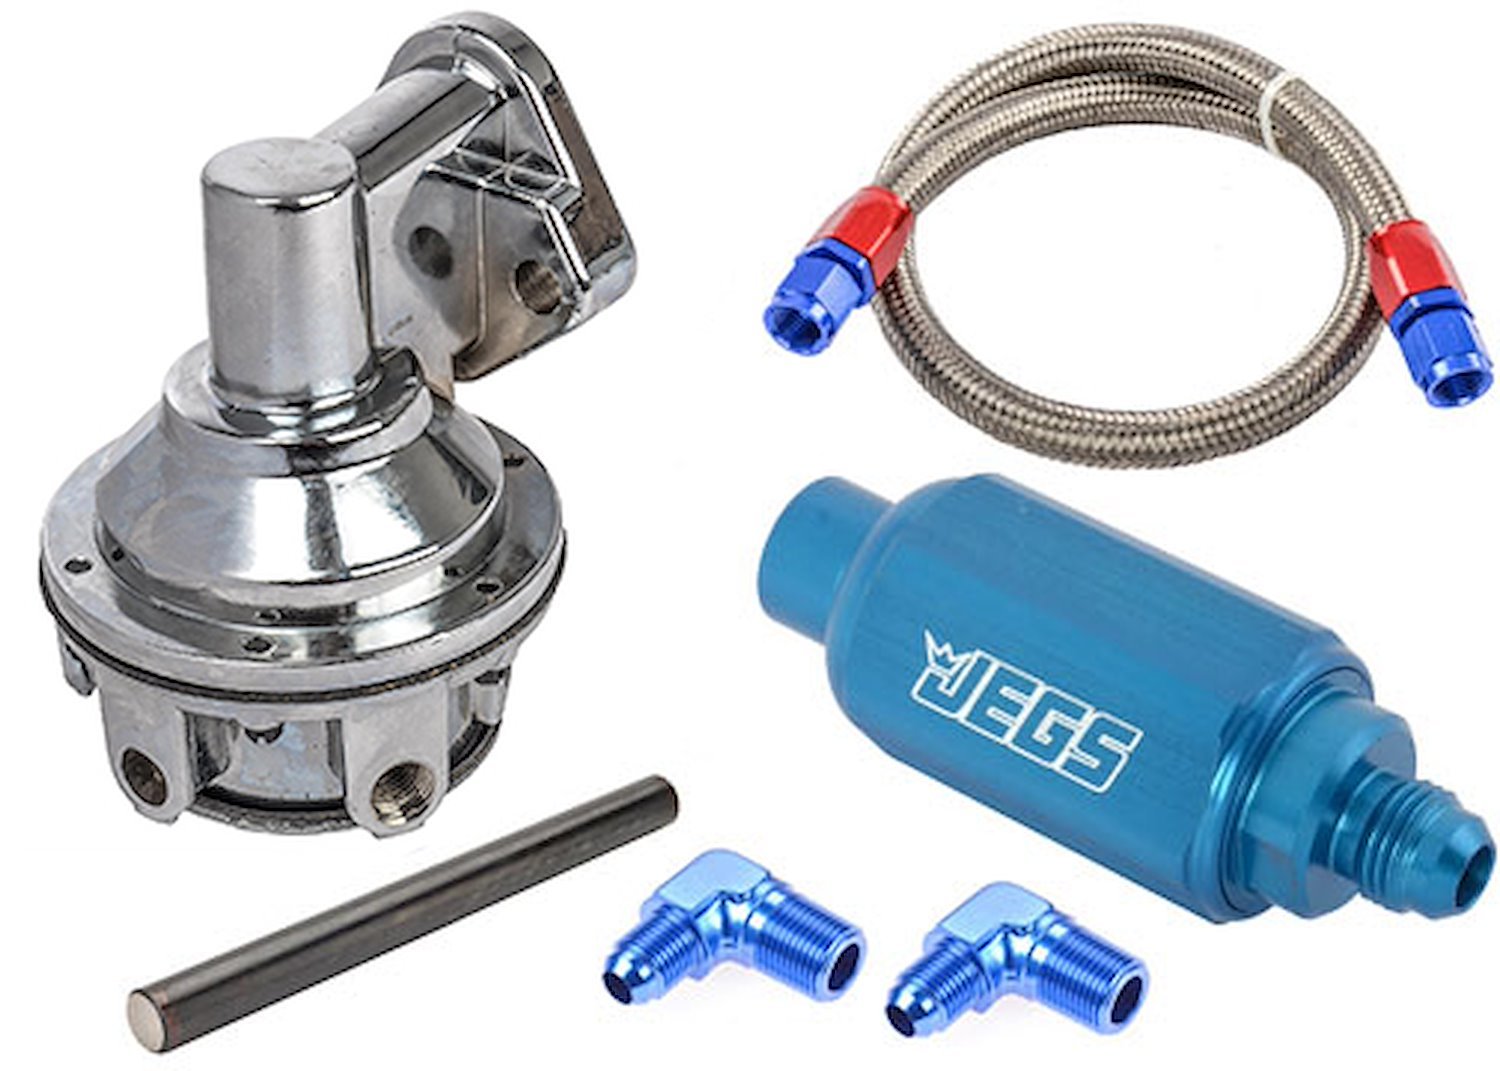 Mechanical Fuel Pump & Installation Kit for Small